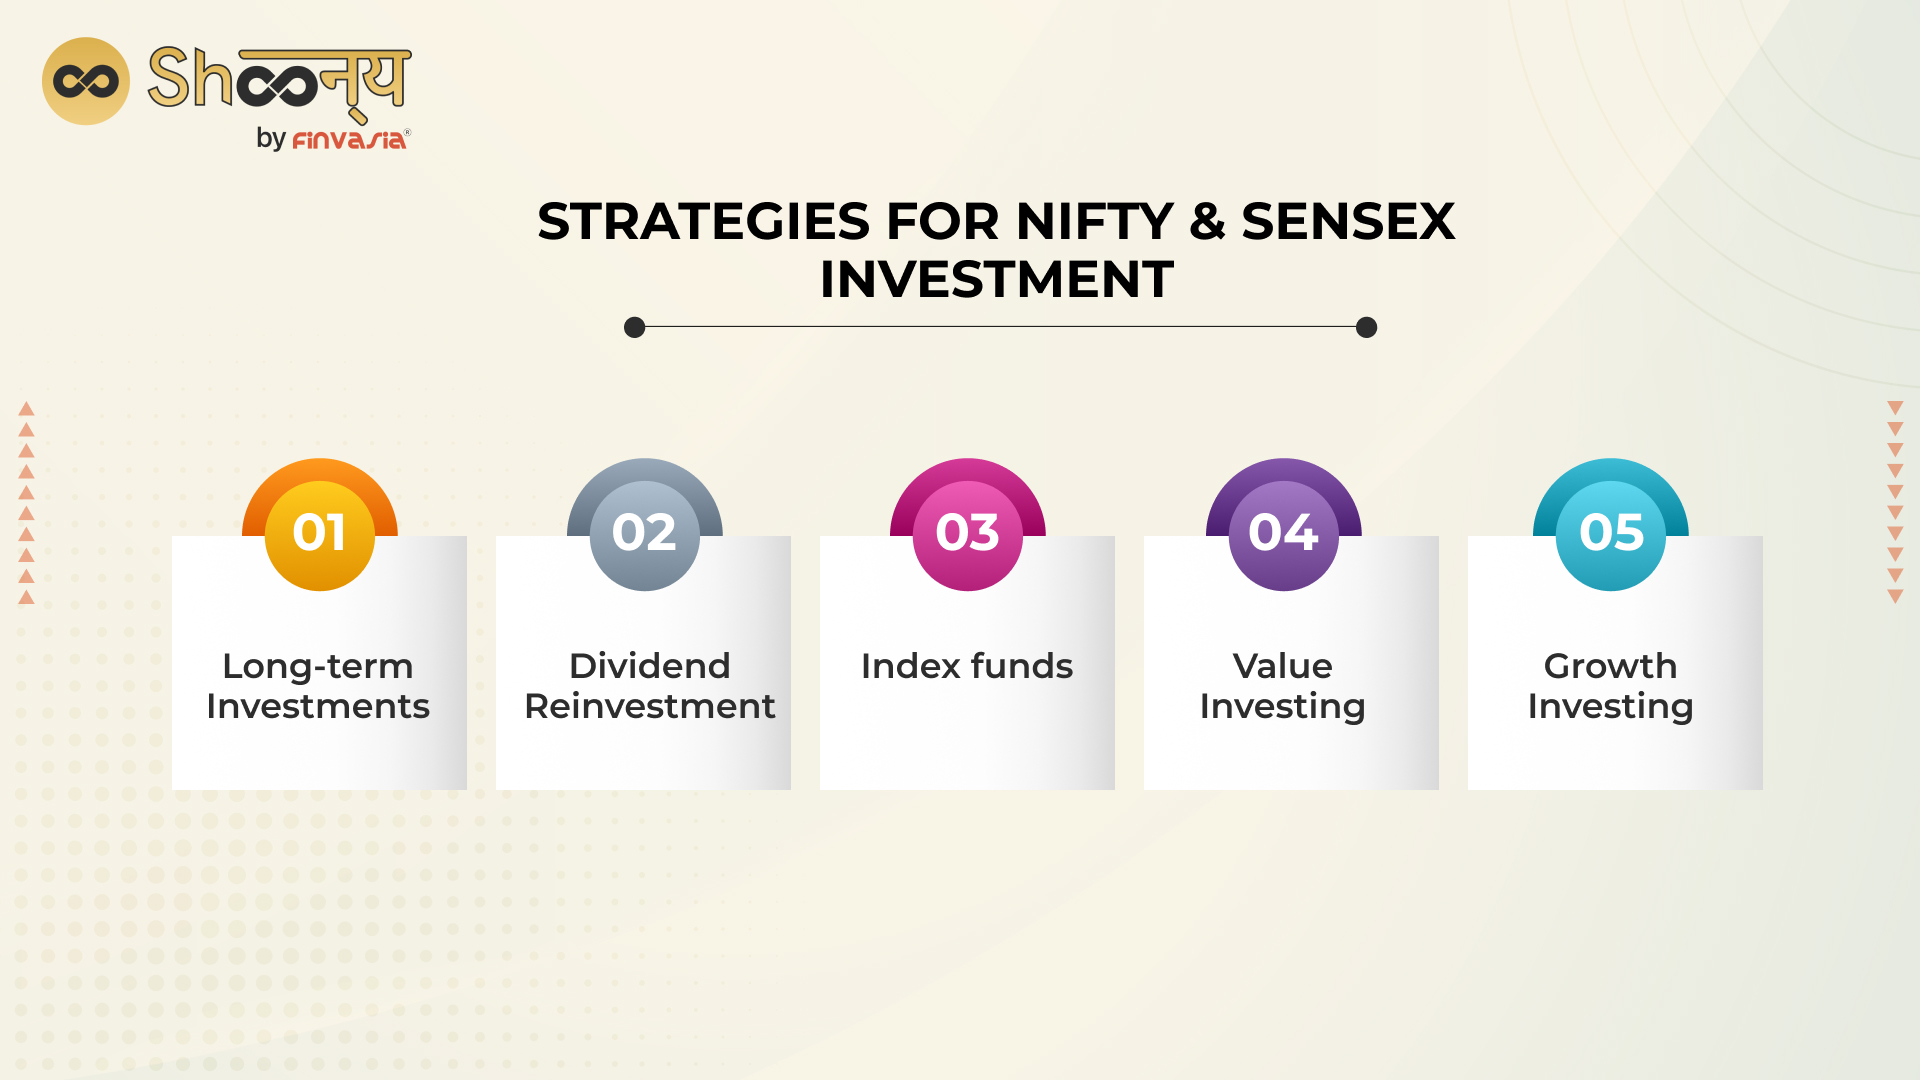 Strategies for Nifty & Sensex investment